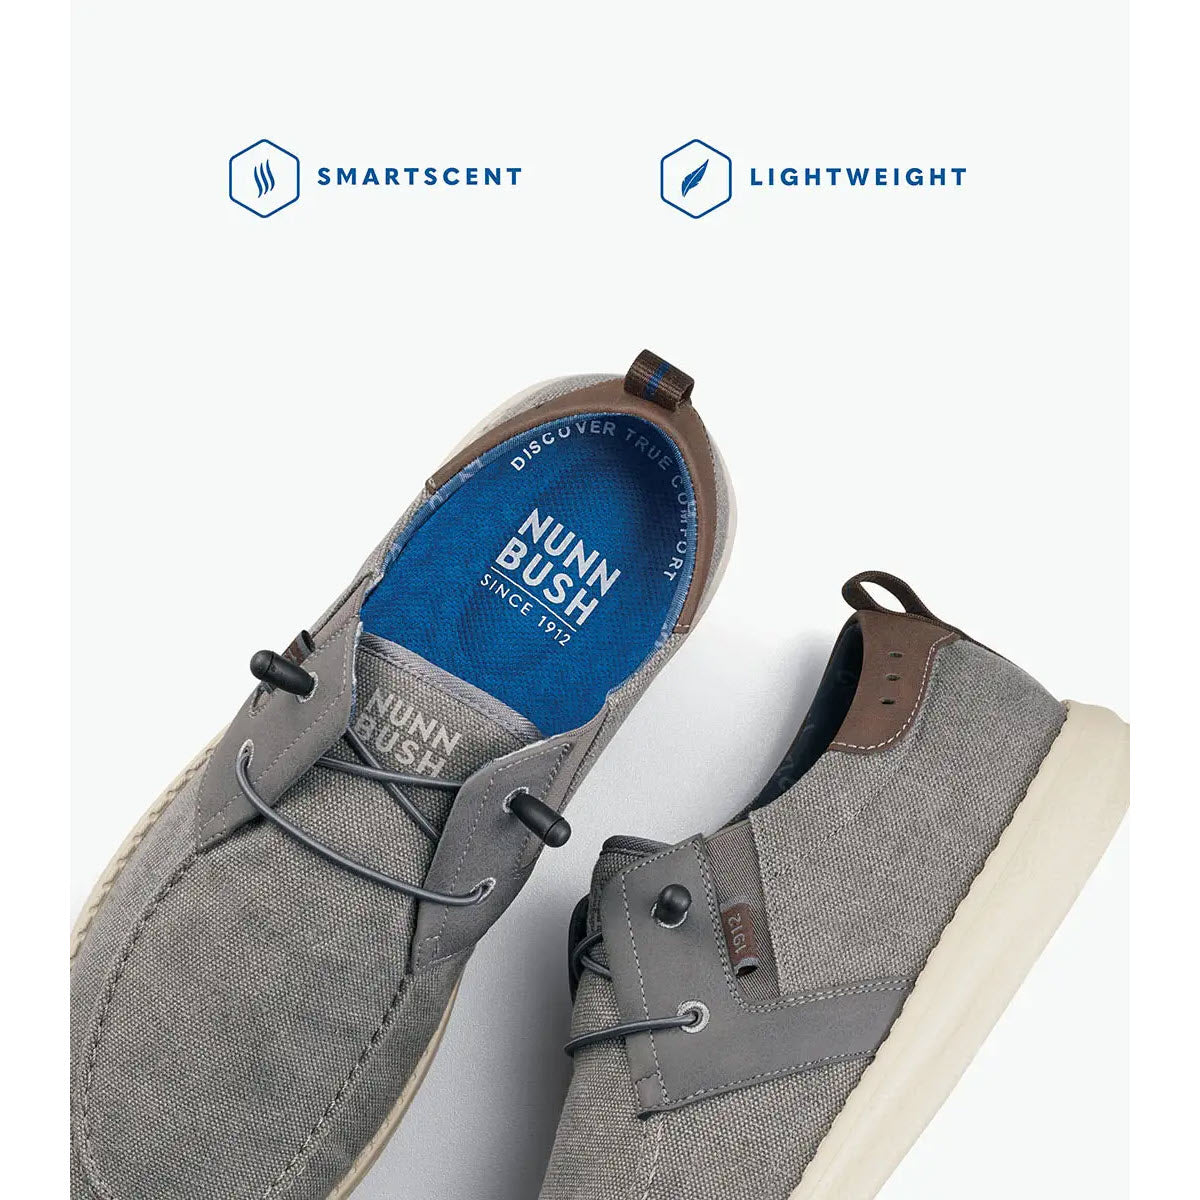 A pair of gray Nunn Bush Brewski moc toe slip on shoes displayed from above, highlighting features like SmartScent and lightweight design.